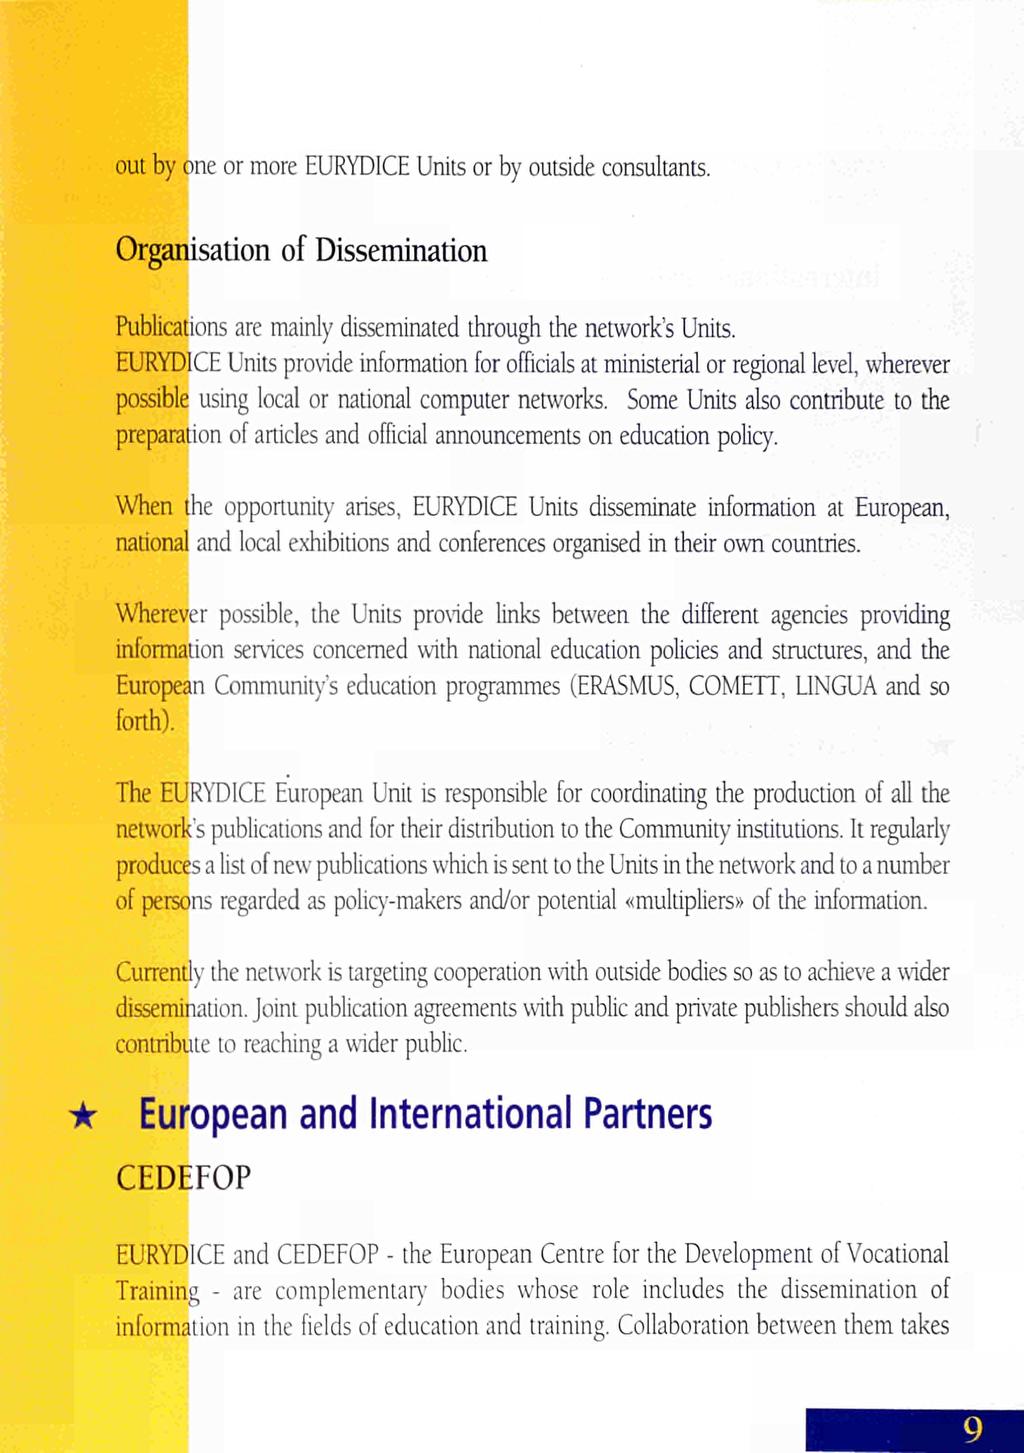 out by one or more EURYDICE Units or by outside consultants. Organisation of Dissemination Publications are mainly disseminated through the network's Units.